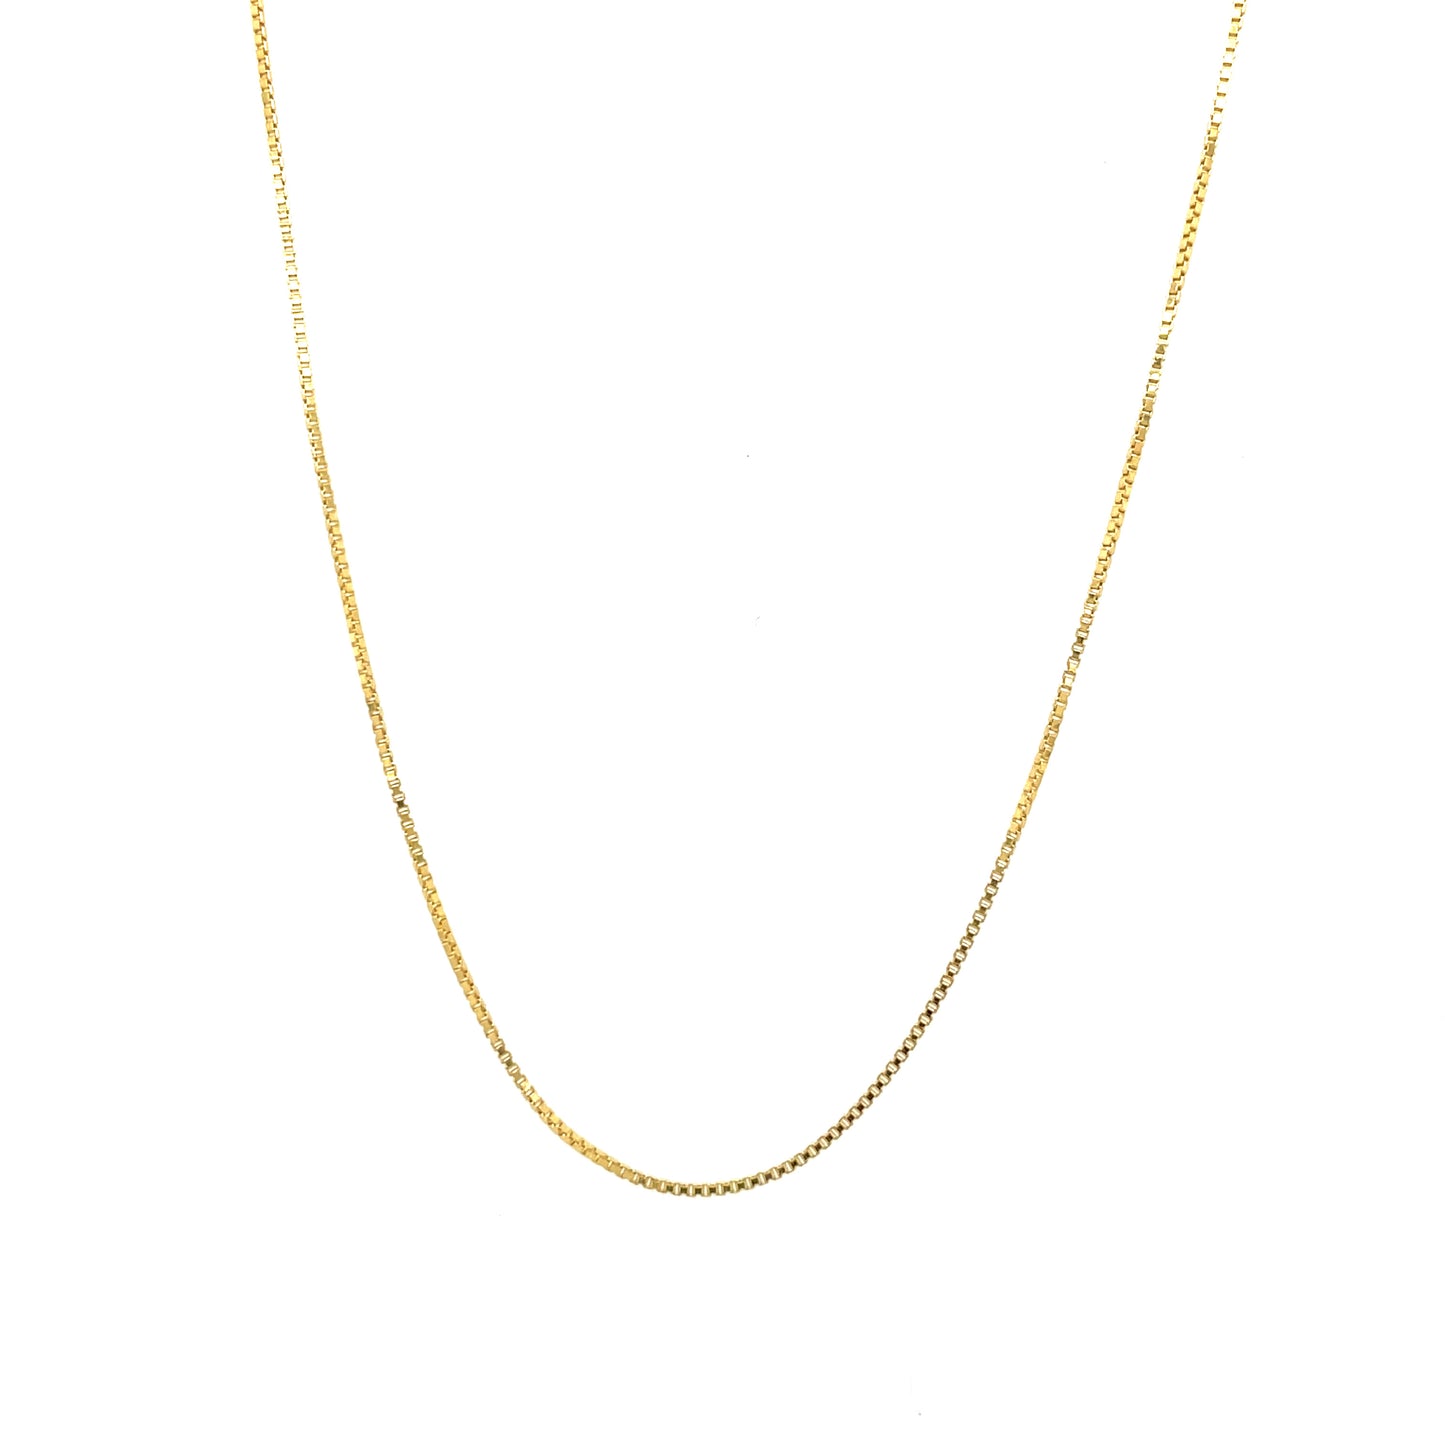 10K Gold Chains/Necklace